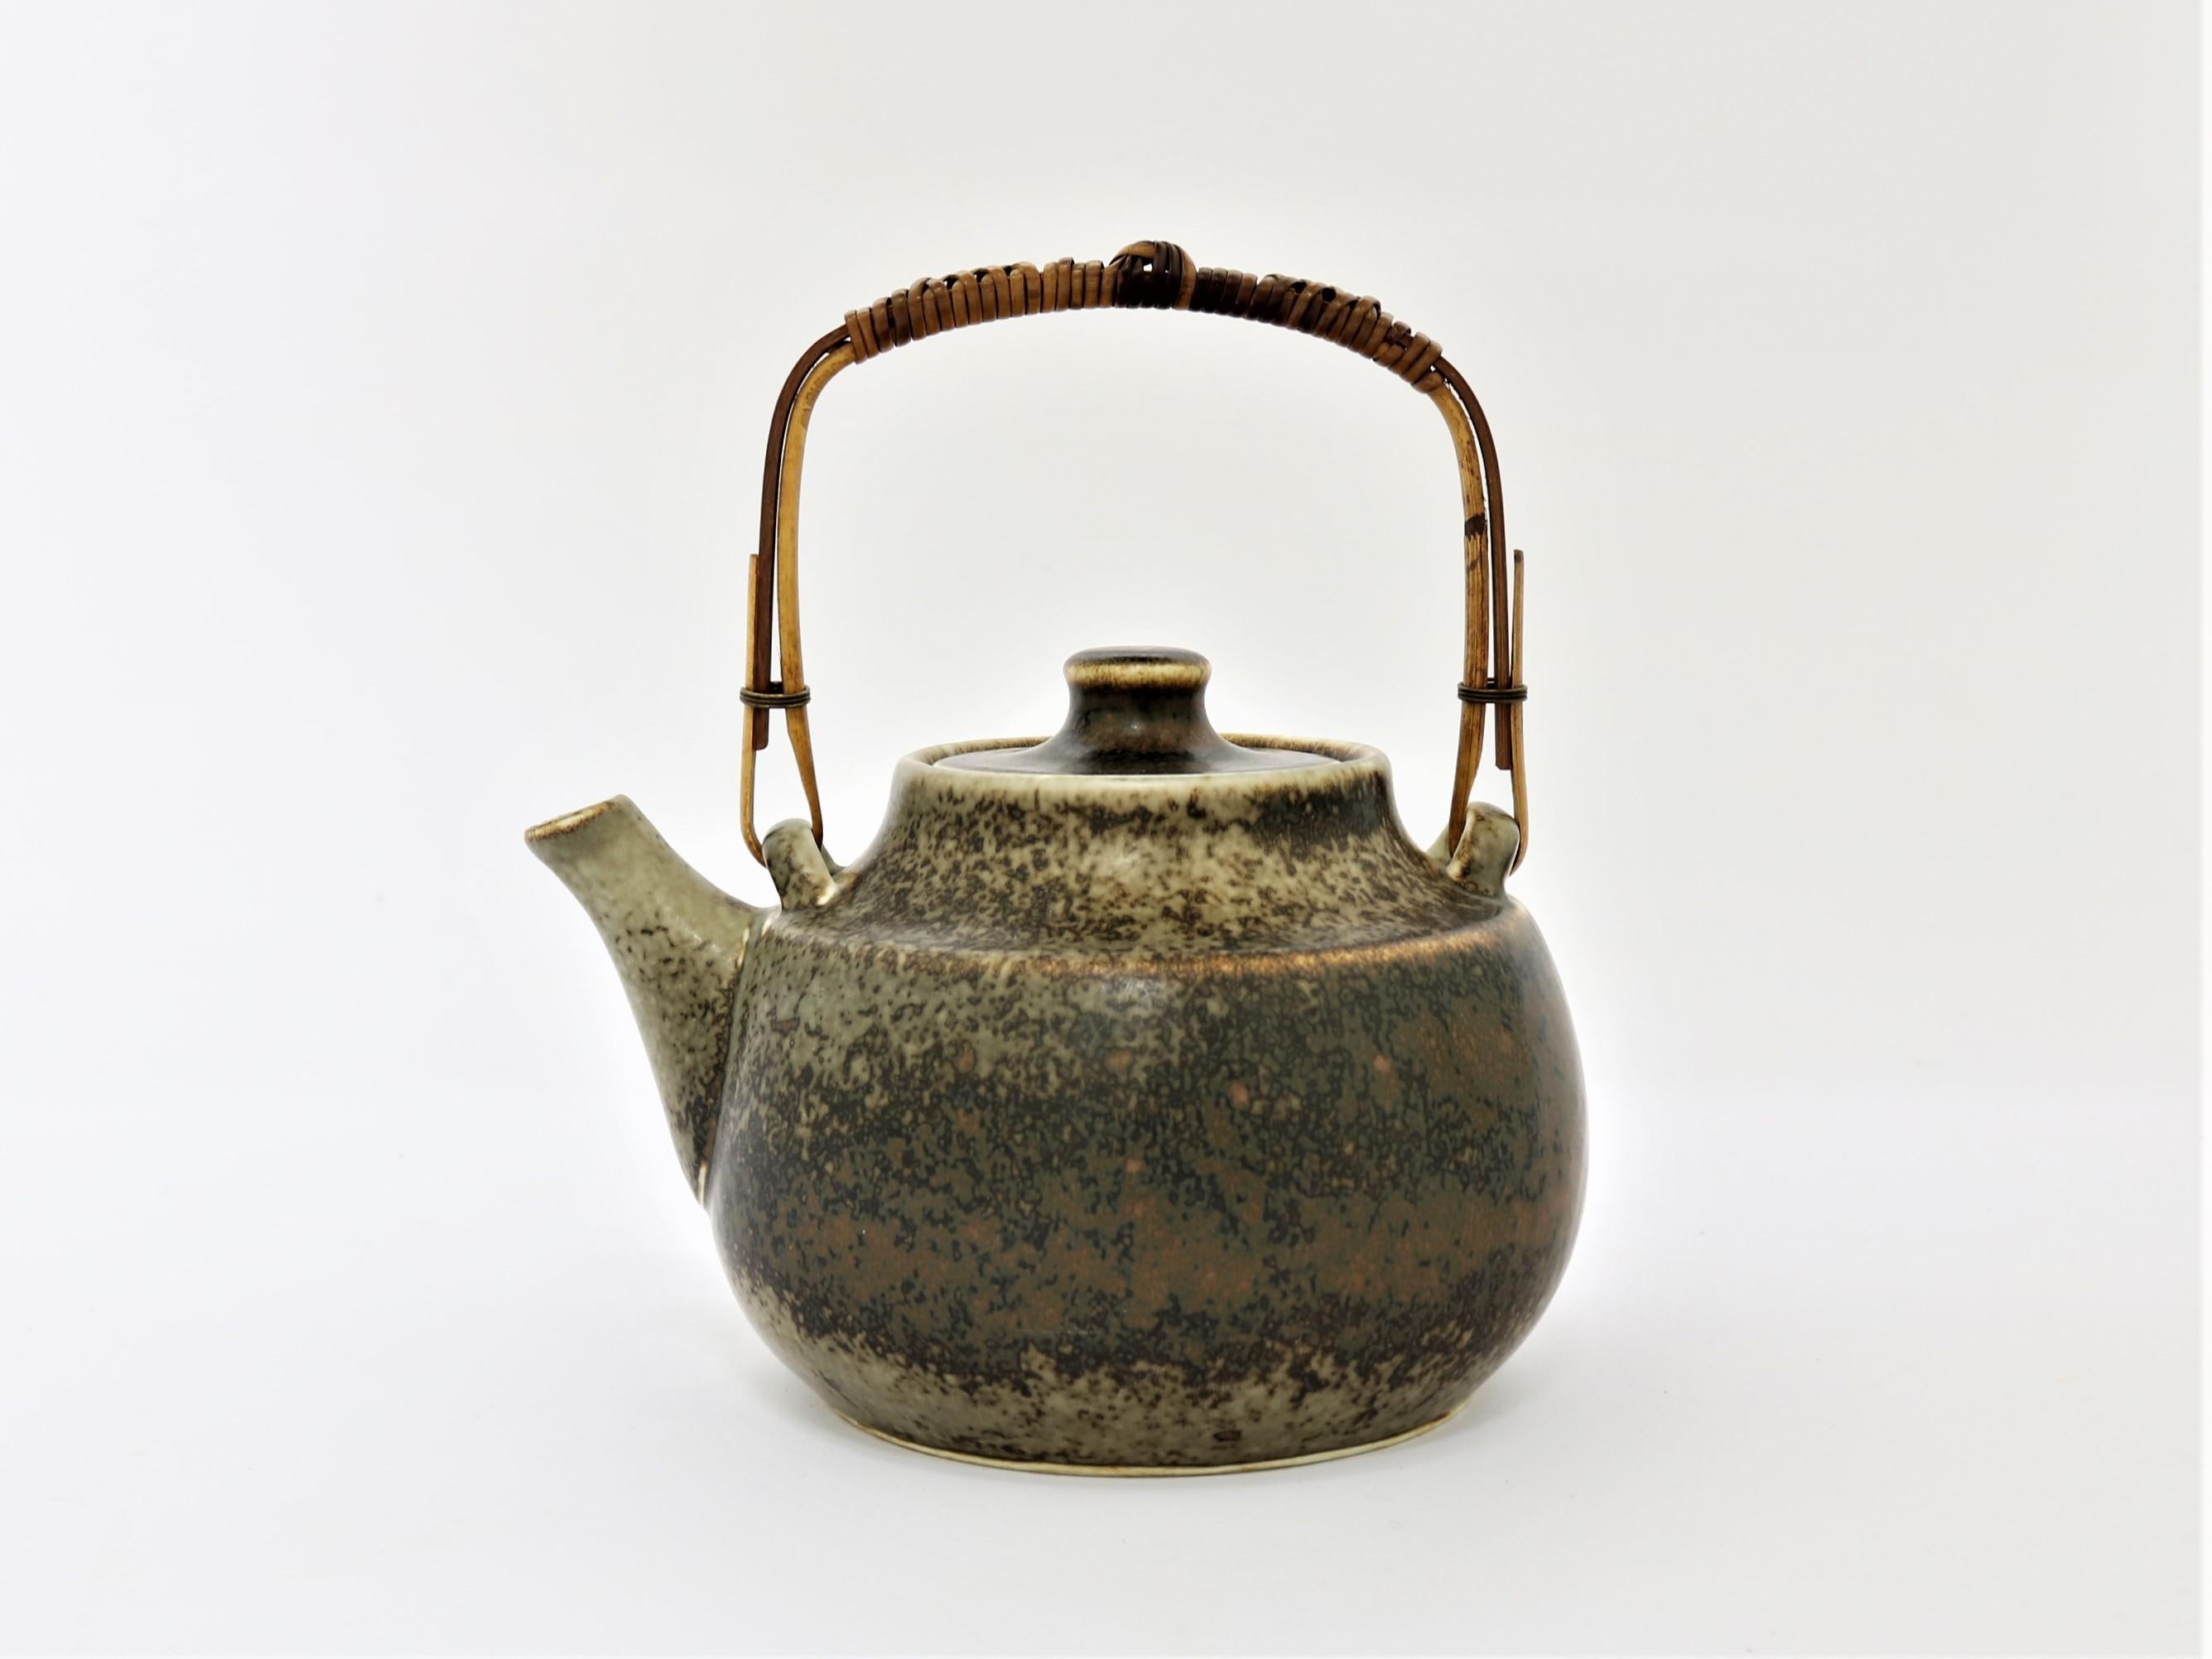 A large stoneware teapot with a bamboo handle covered with rattan and a semi matte speckled brown glaze by Carl-Harry Stalhane for Rorstrand in the 1960s.

Signed with artist signature 